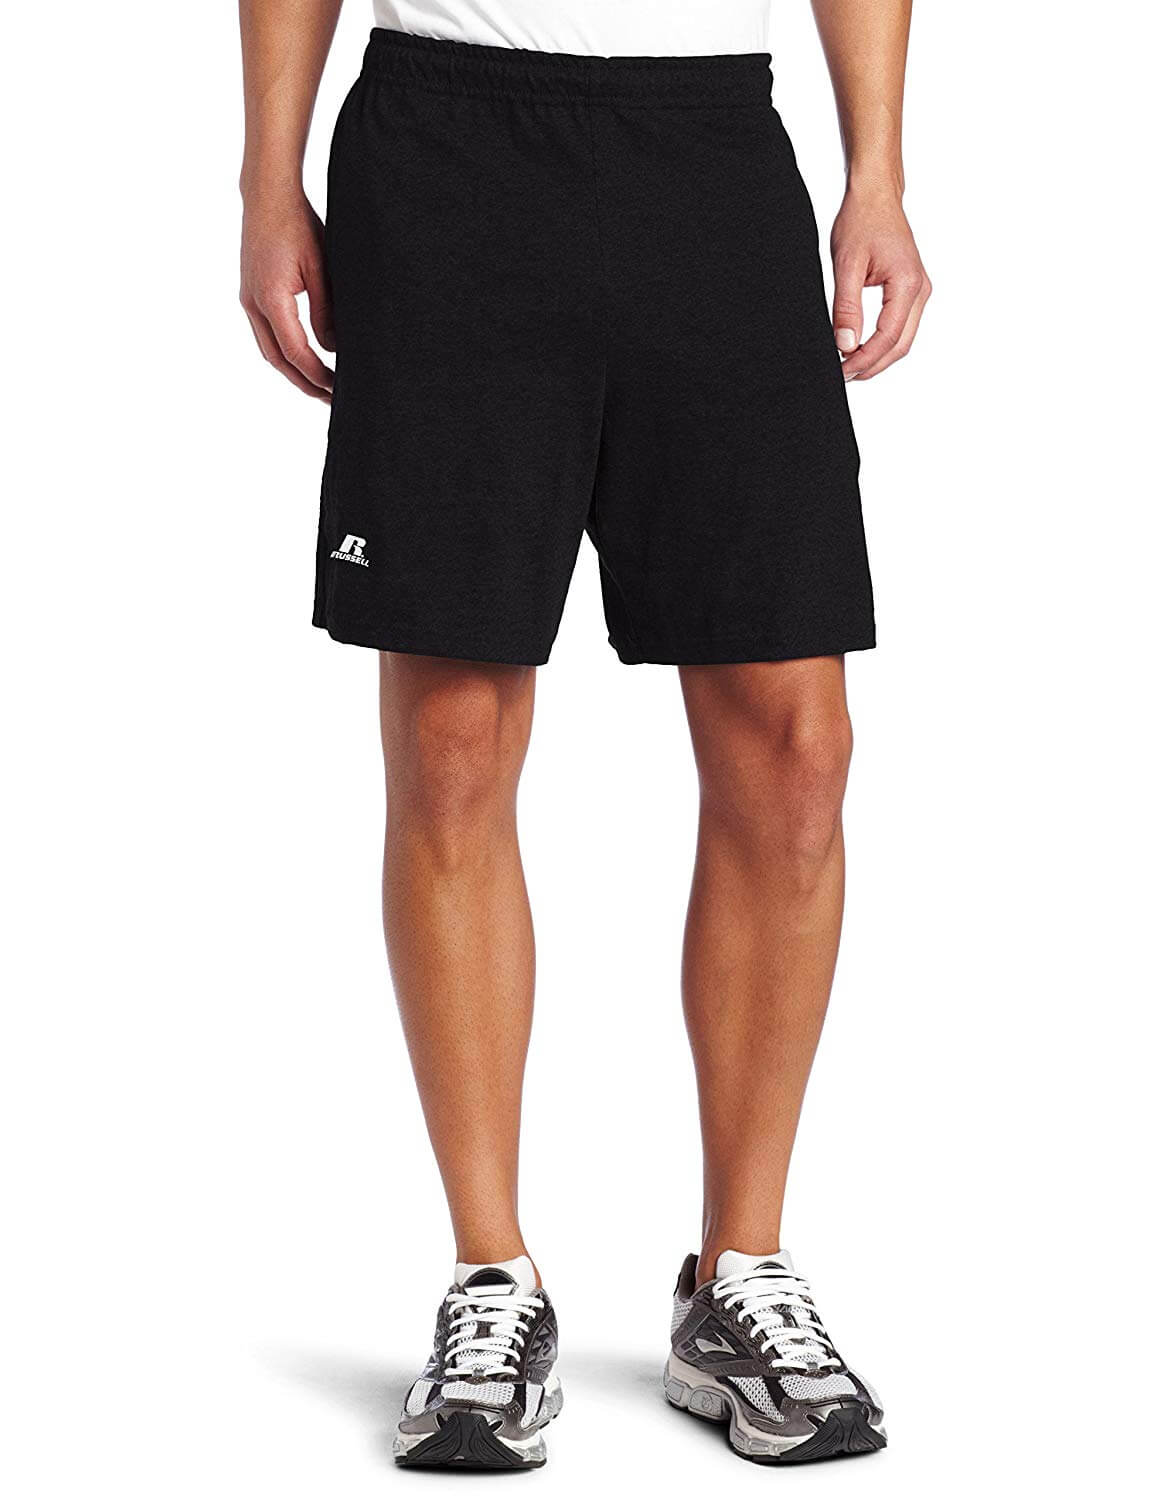 Sports Sneakers With Black Shorts